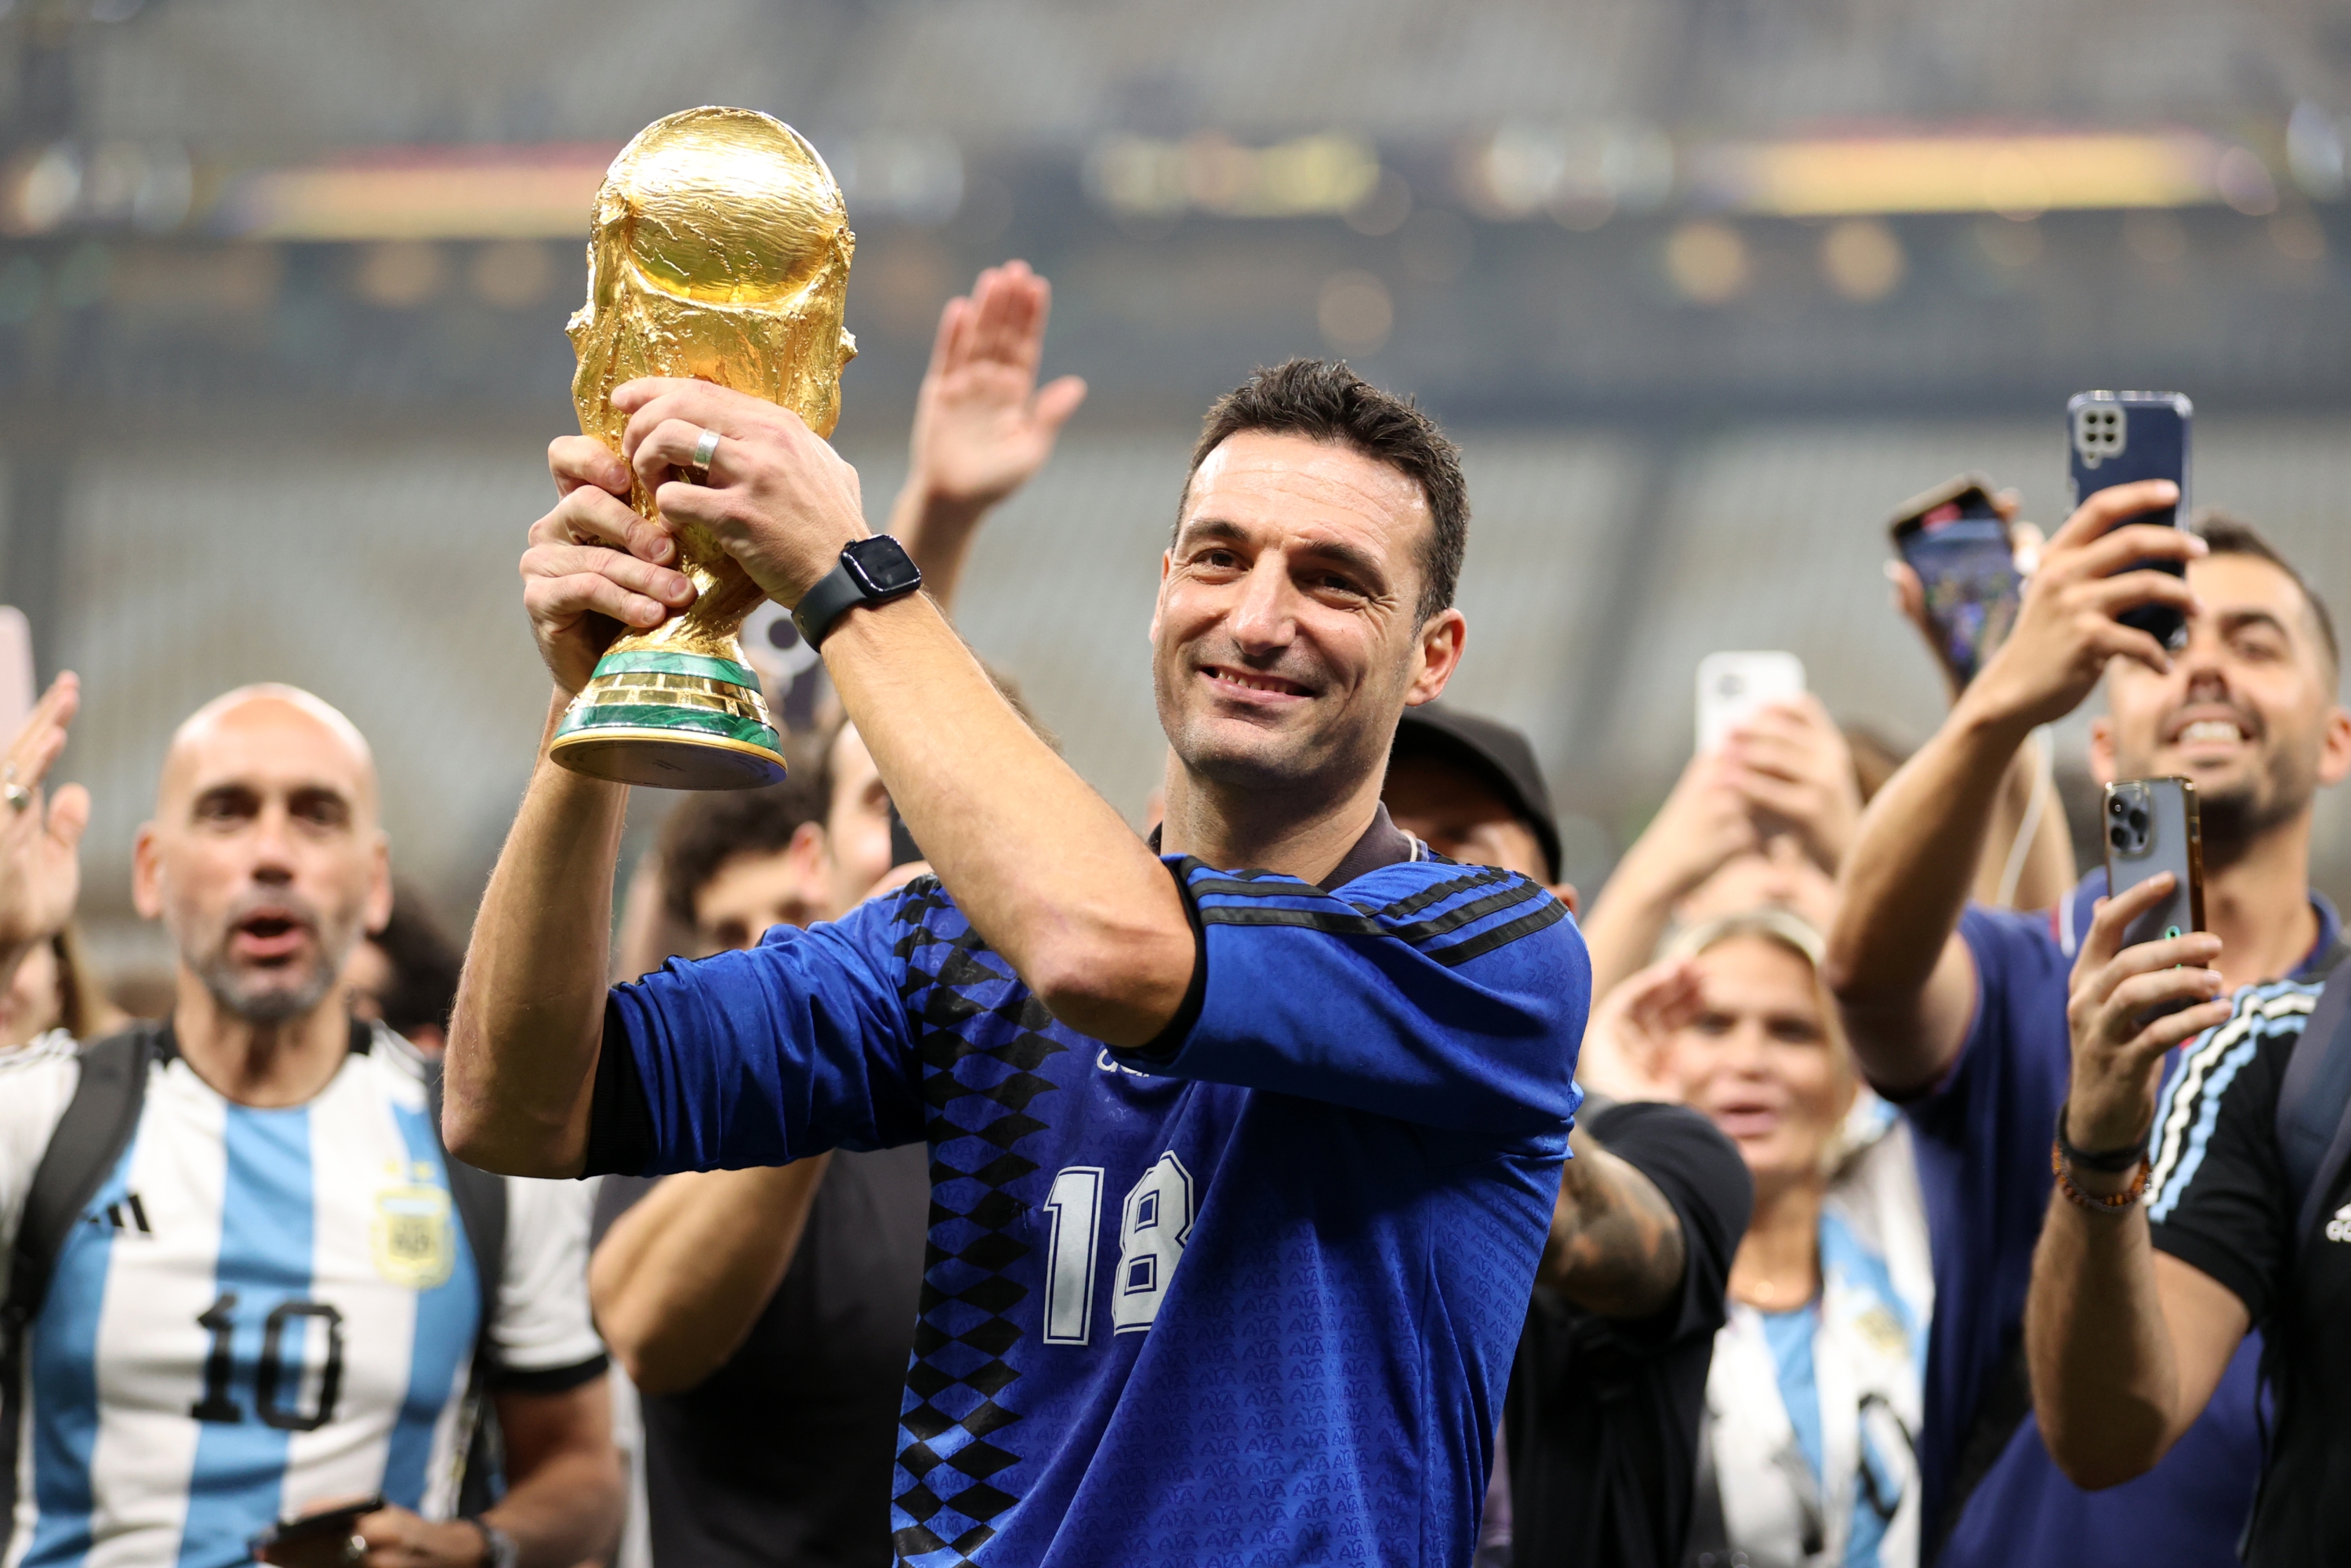 LUSAIL CITY, QATAR - DECEMBER 18: Lionel Scaloni, Head Coach of Argentina, celebrates with the FIFA World Cup Qatar 2022 Winner's Trophy after the team's victory during the FIFA World Cup Qatar 2022 Final match between Argentina and France at Lusail Stadium on December 18, 2022 in Lusail City, Qatar. (Photo by Julian Finney/Getty Images)